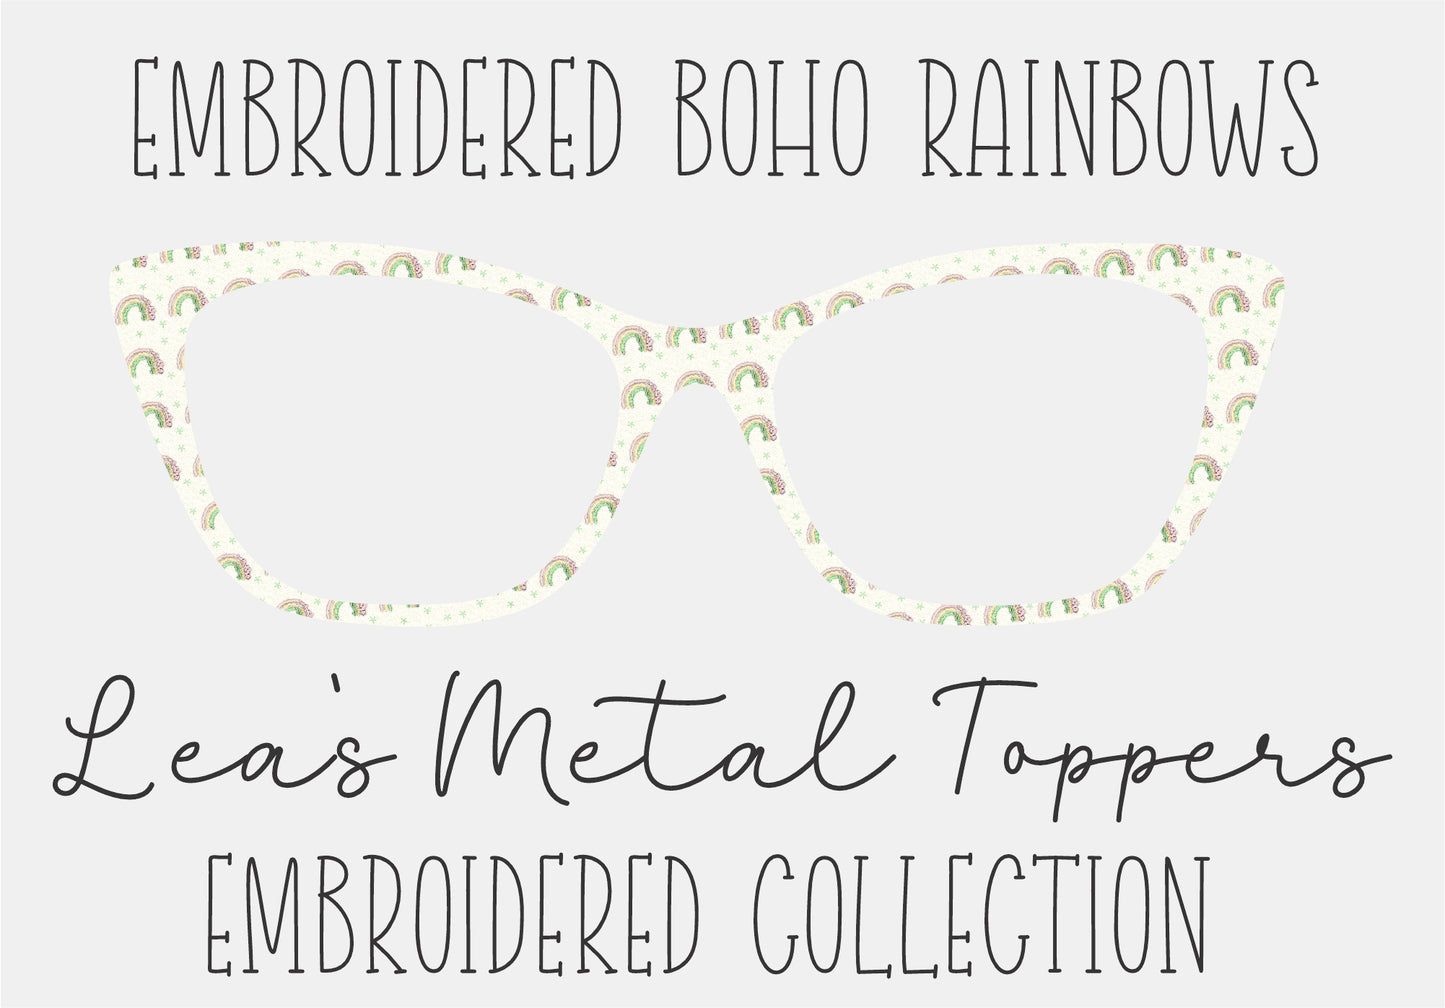 EMBROIDERED BOHO RAINBOWS Eyewear Frame Toppers COMES WITH MAGNETS